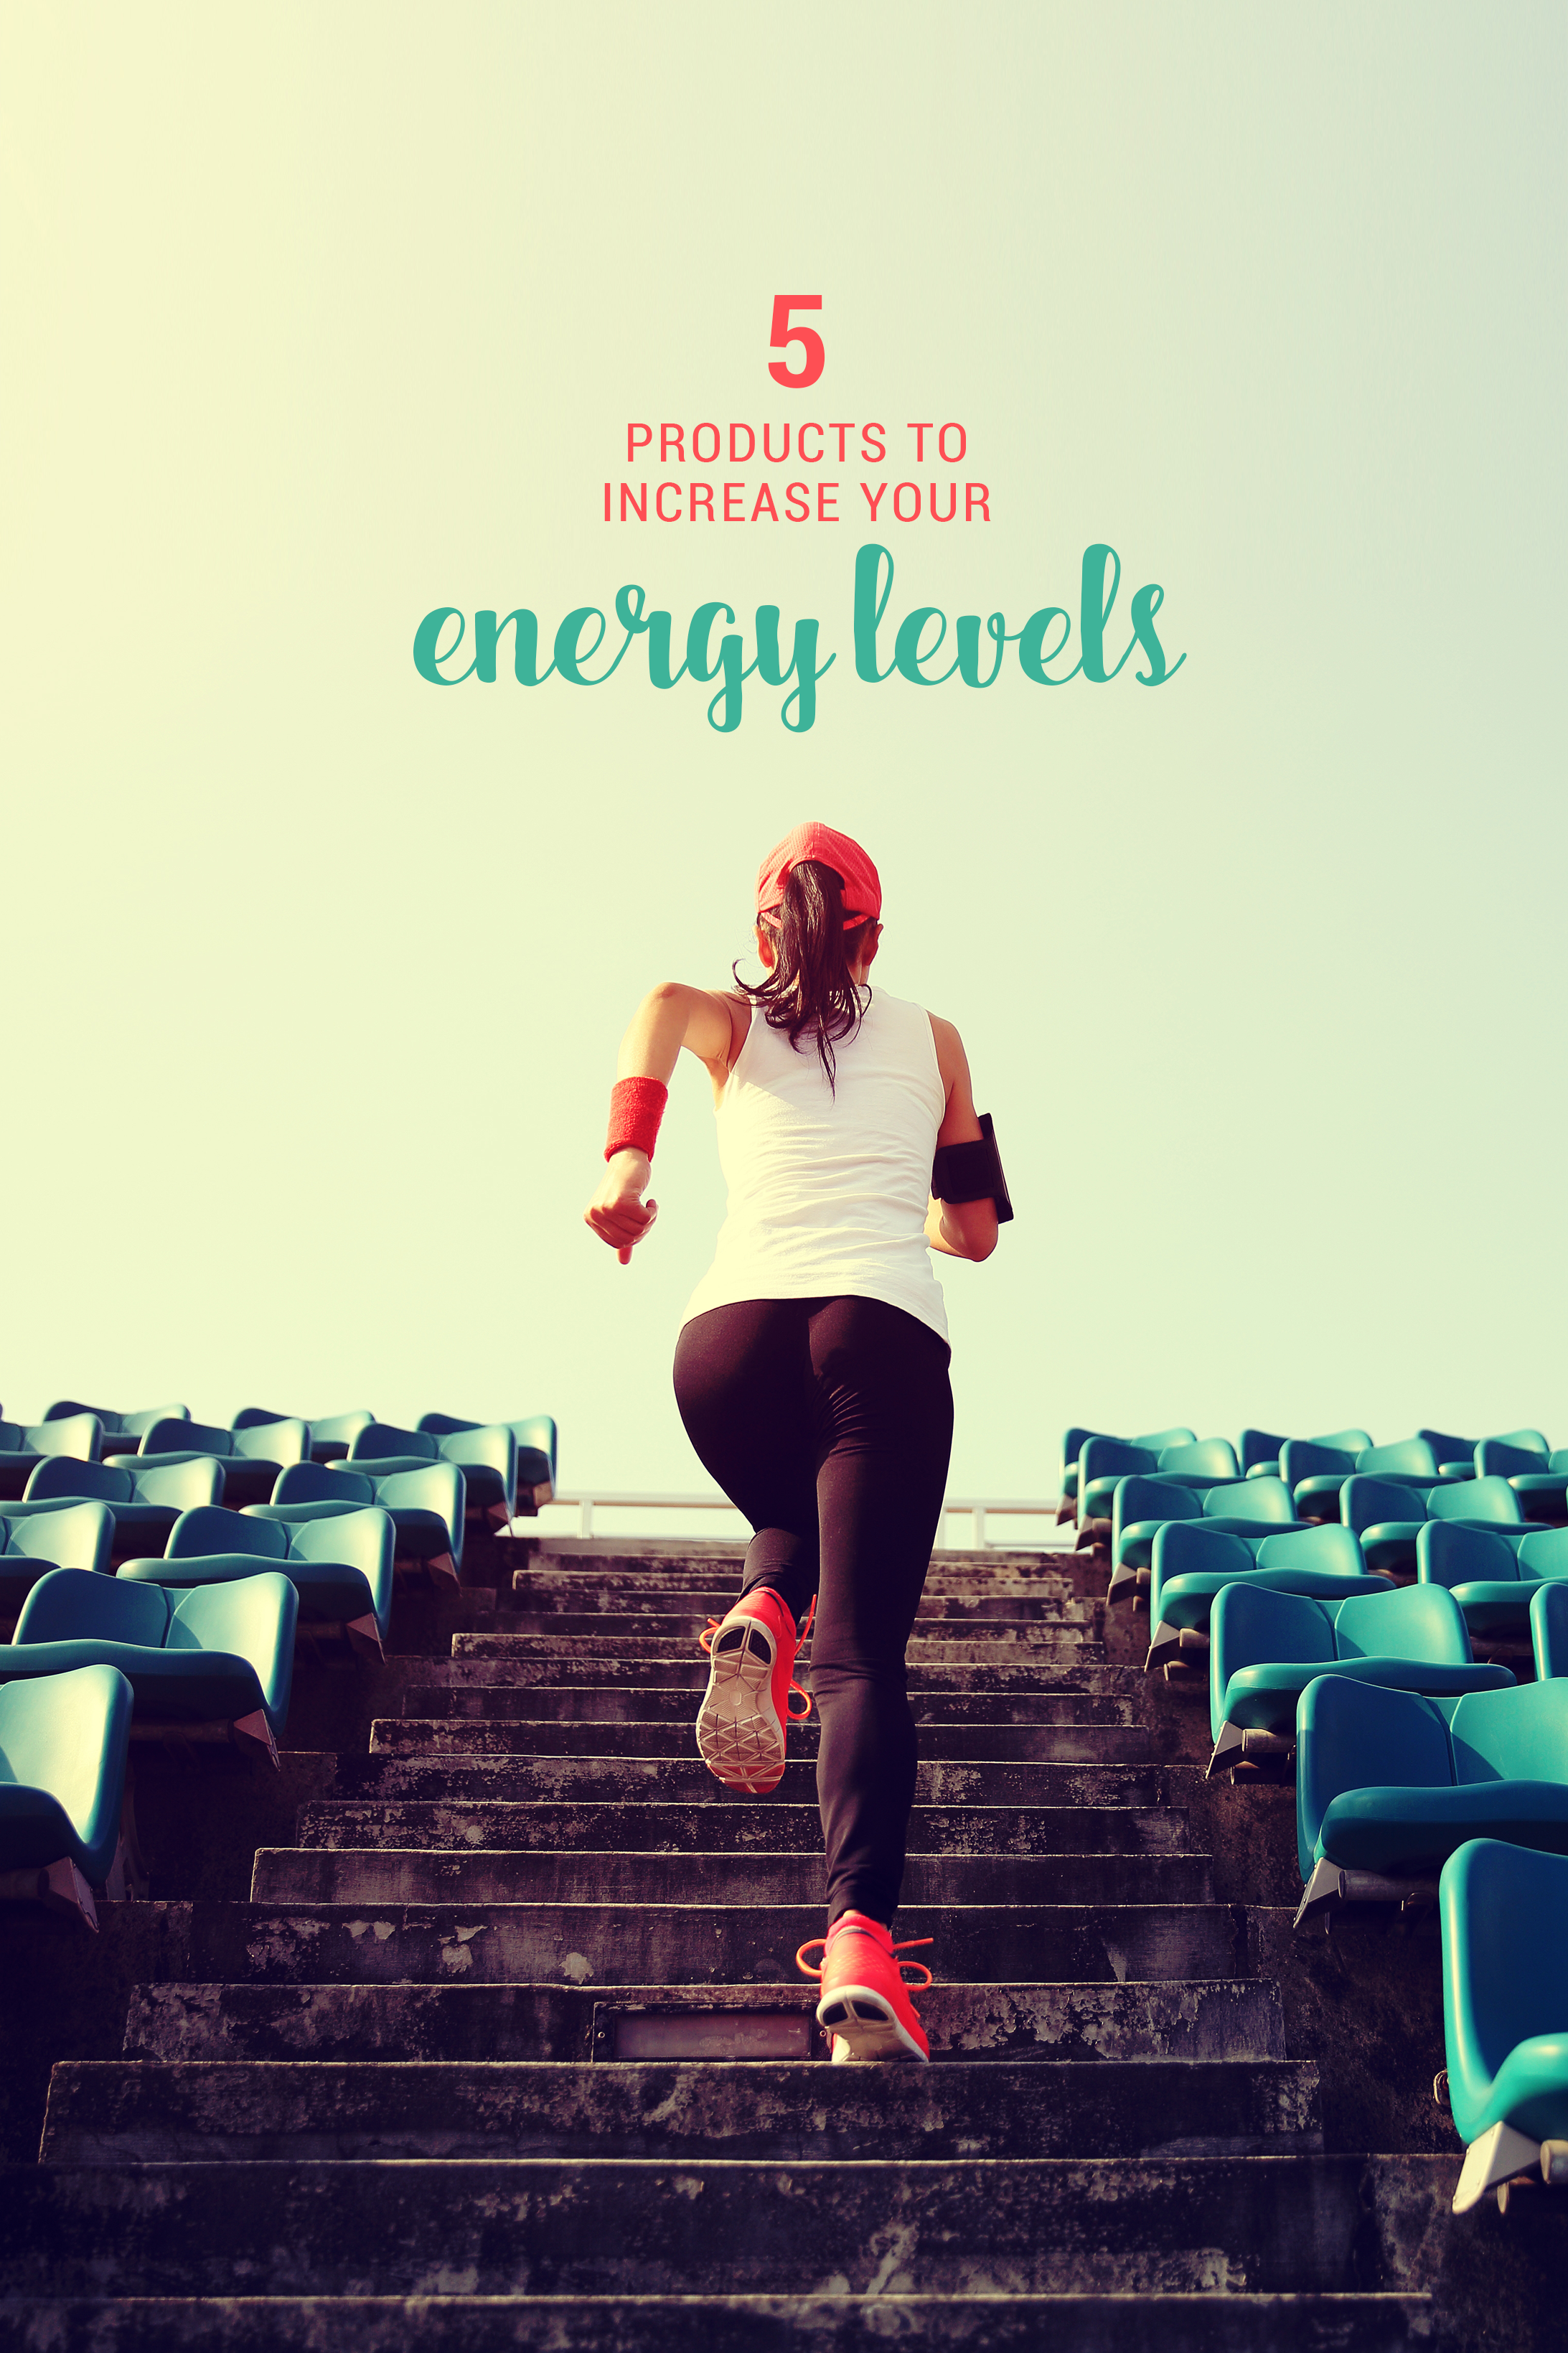 5 Products to Increase Your Energy Levels